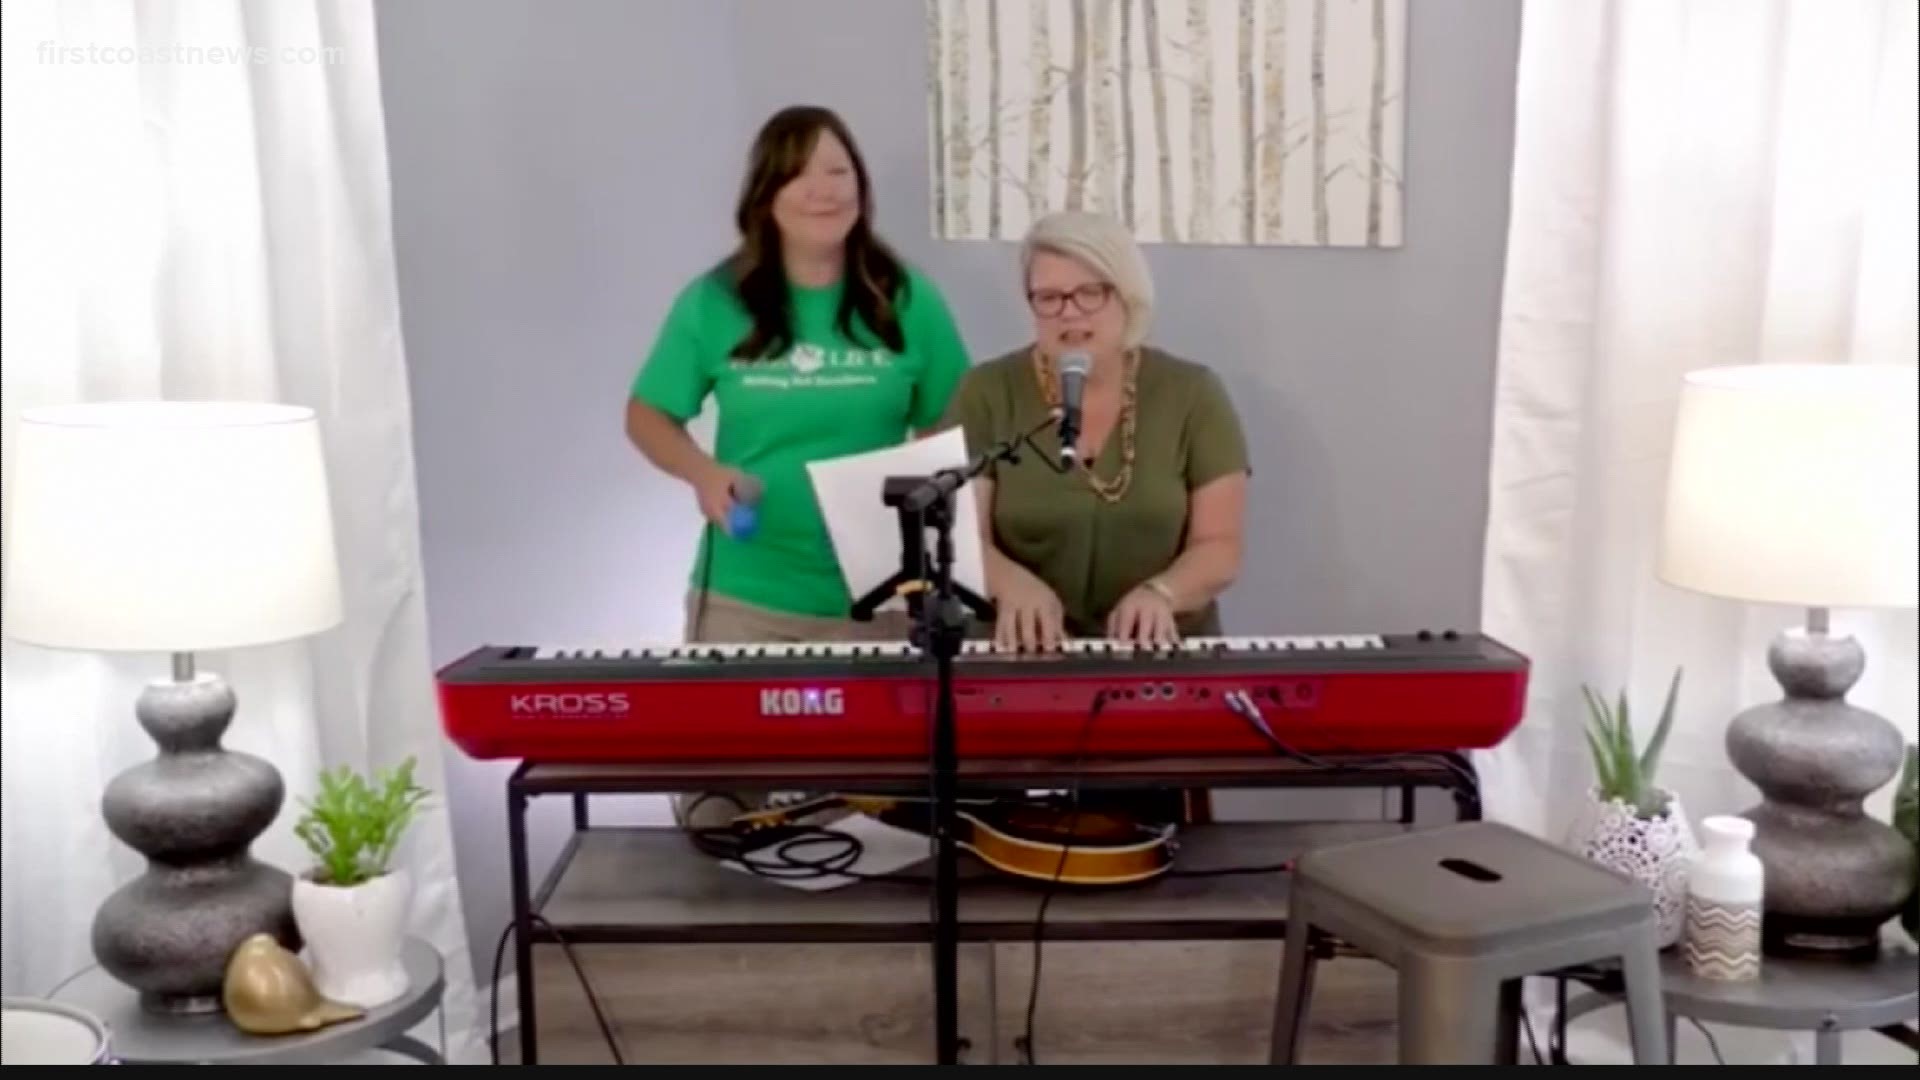 Two Duval County Public School teachers wrote and performed an original tune thanking parents for their work and encouraging them during the last weeks of school.